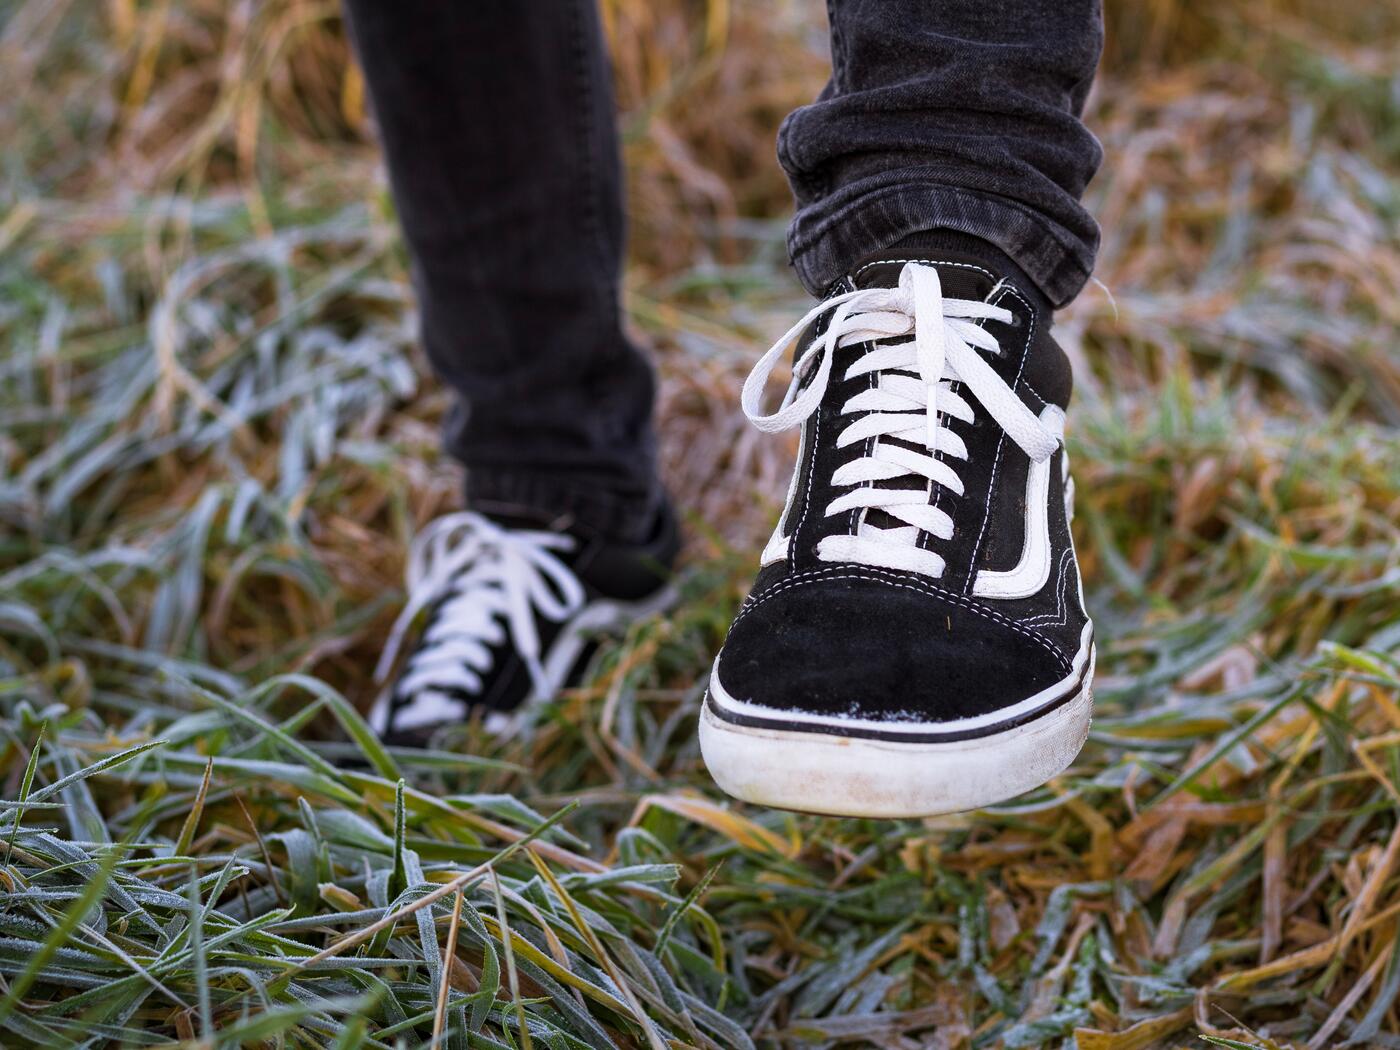 Close up of black sneakers on feet, standing on grass